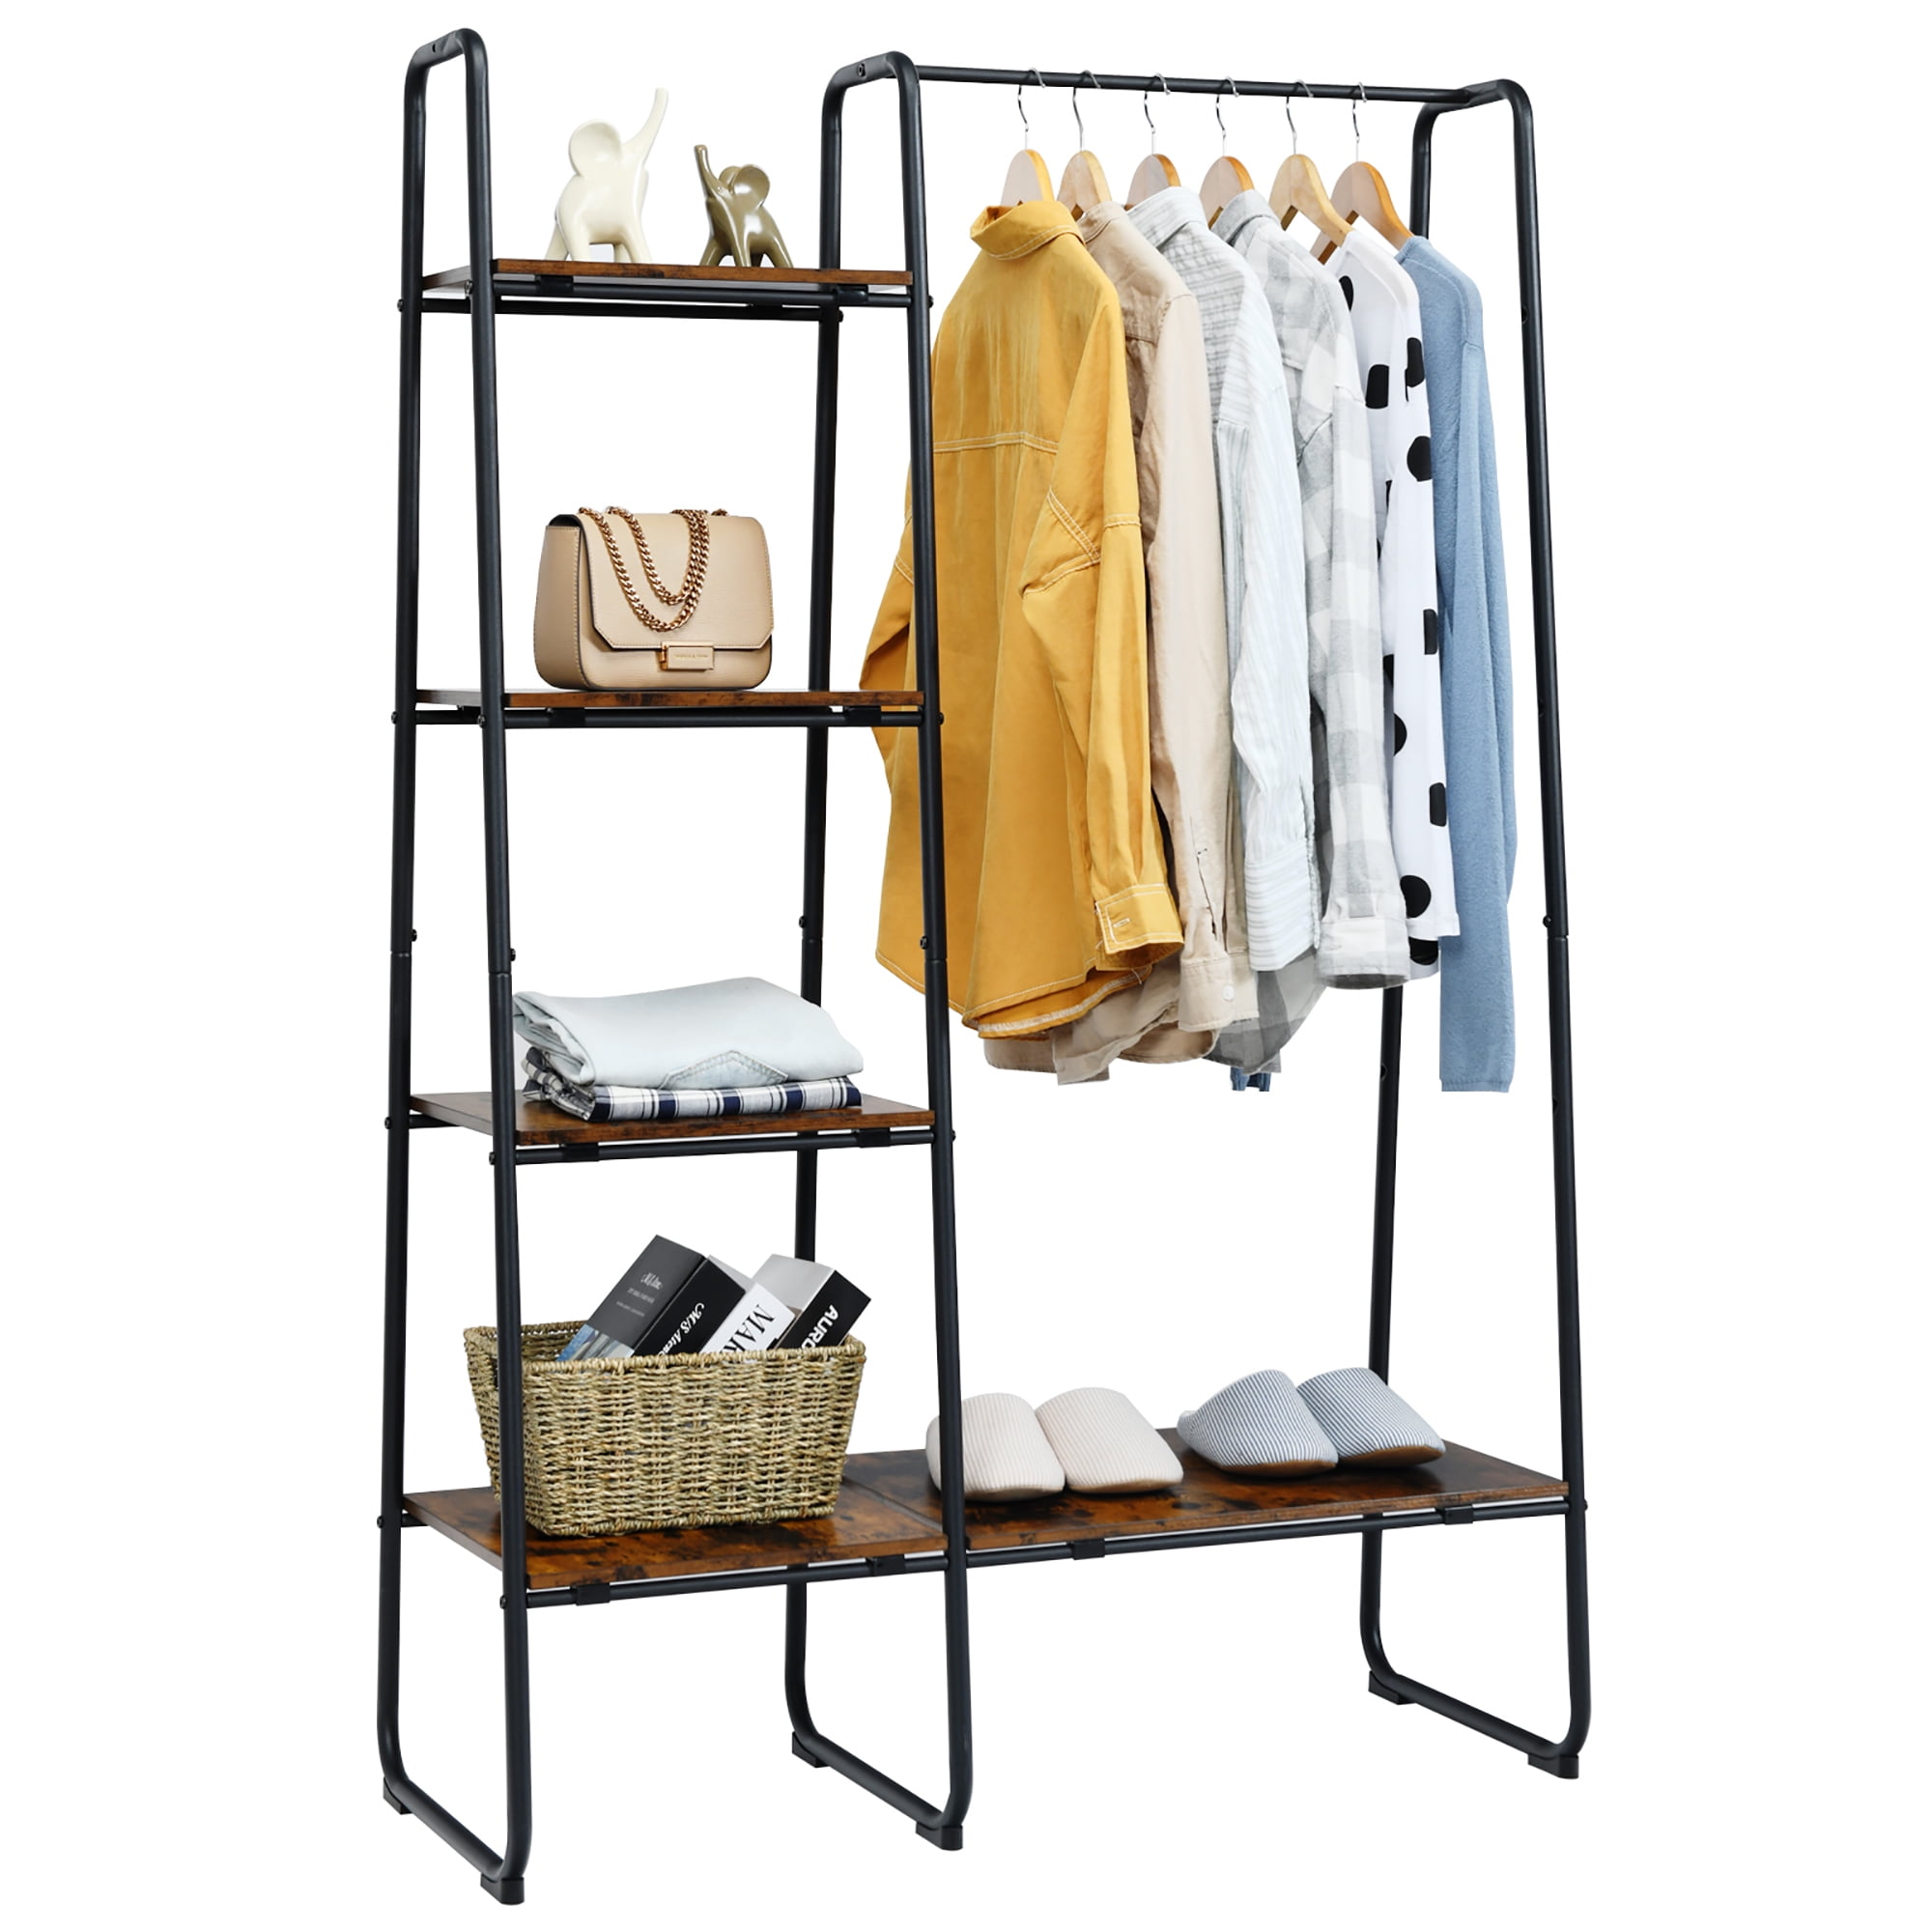 Heavy Duty Clothing Rack Dry Hanger Clothes Garment Rack Stand Rack & Top Rod US 